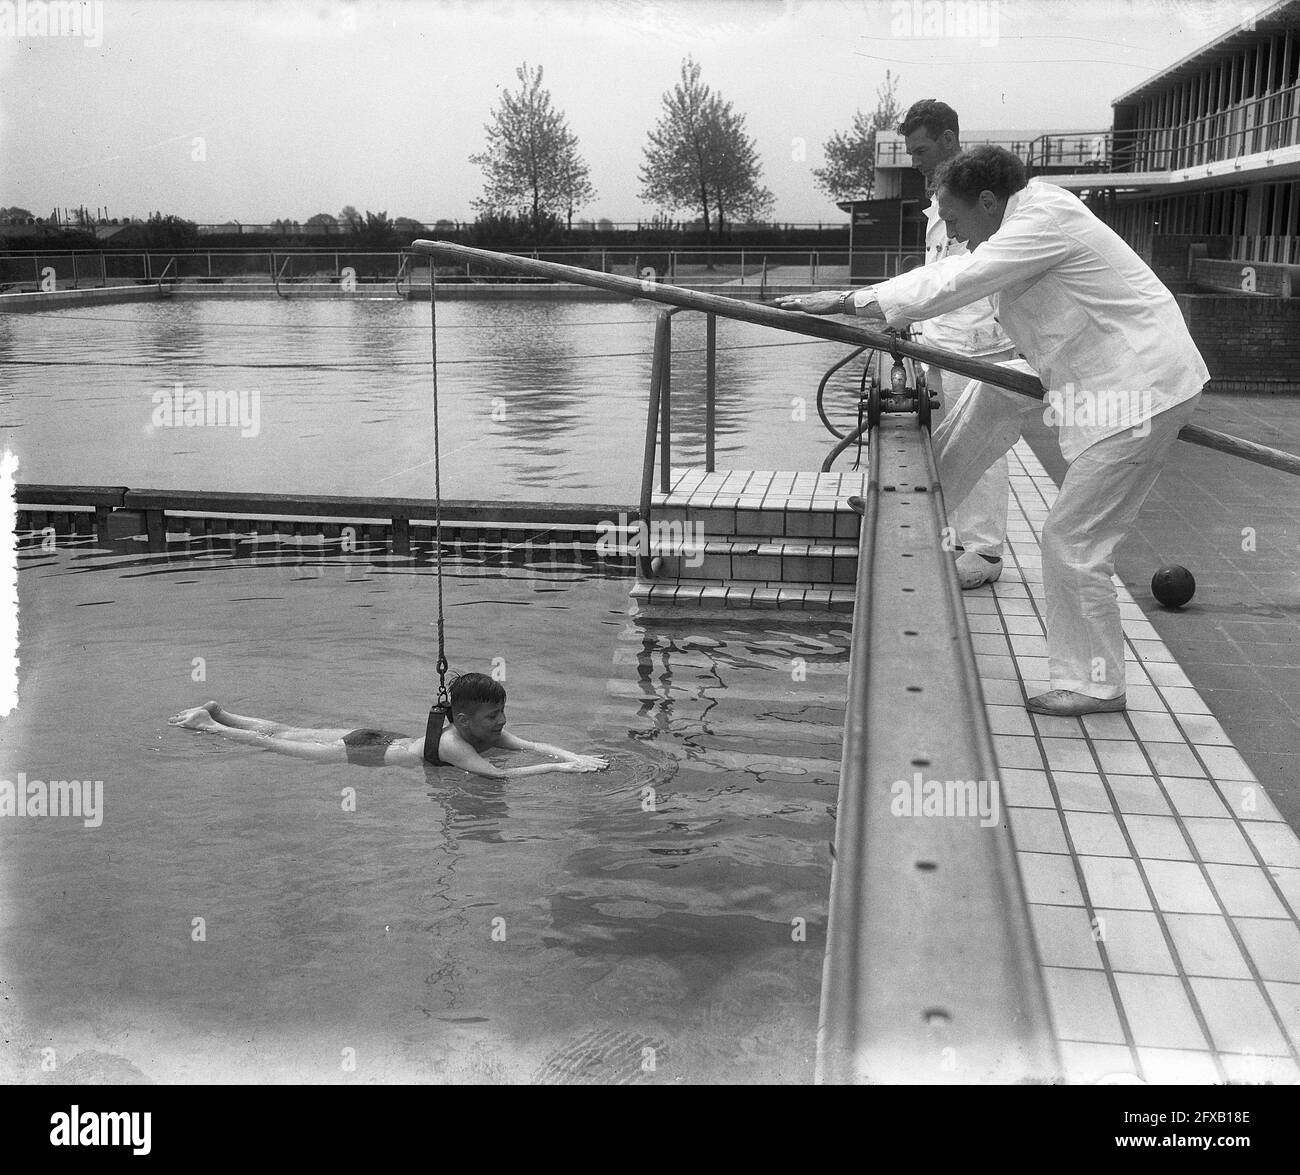 First student in Jan Van Galenbad (Rob Jansen, age 8). Lesson with the running rod, May 17, 1953, pupils, swimming pools, swimming lessons, swimming, The Netherlands, 20th century press agency photo, news to remember, documentary, historic photography 1945-1990, visual stories, human history of the Twentieth Century, capturing moments in time Stock Photo